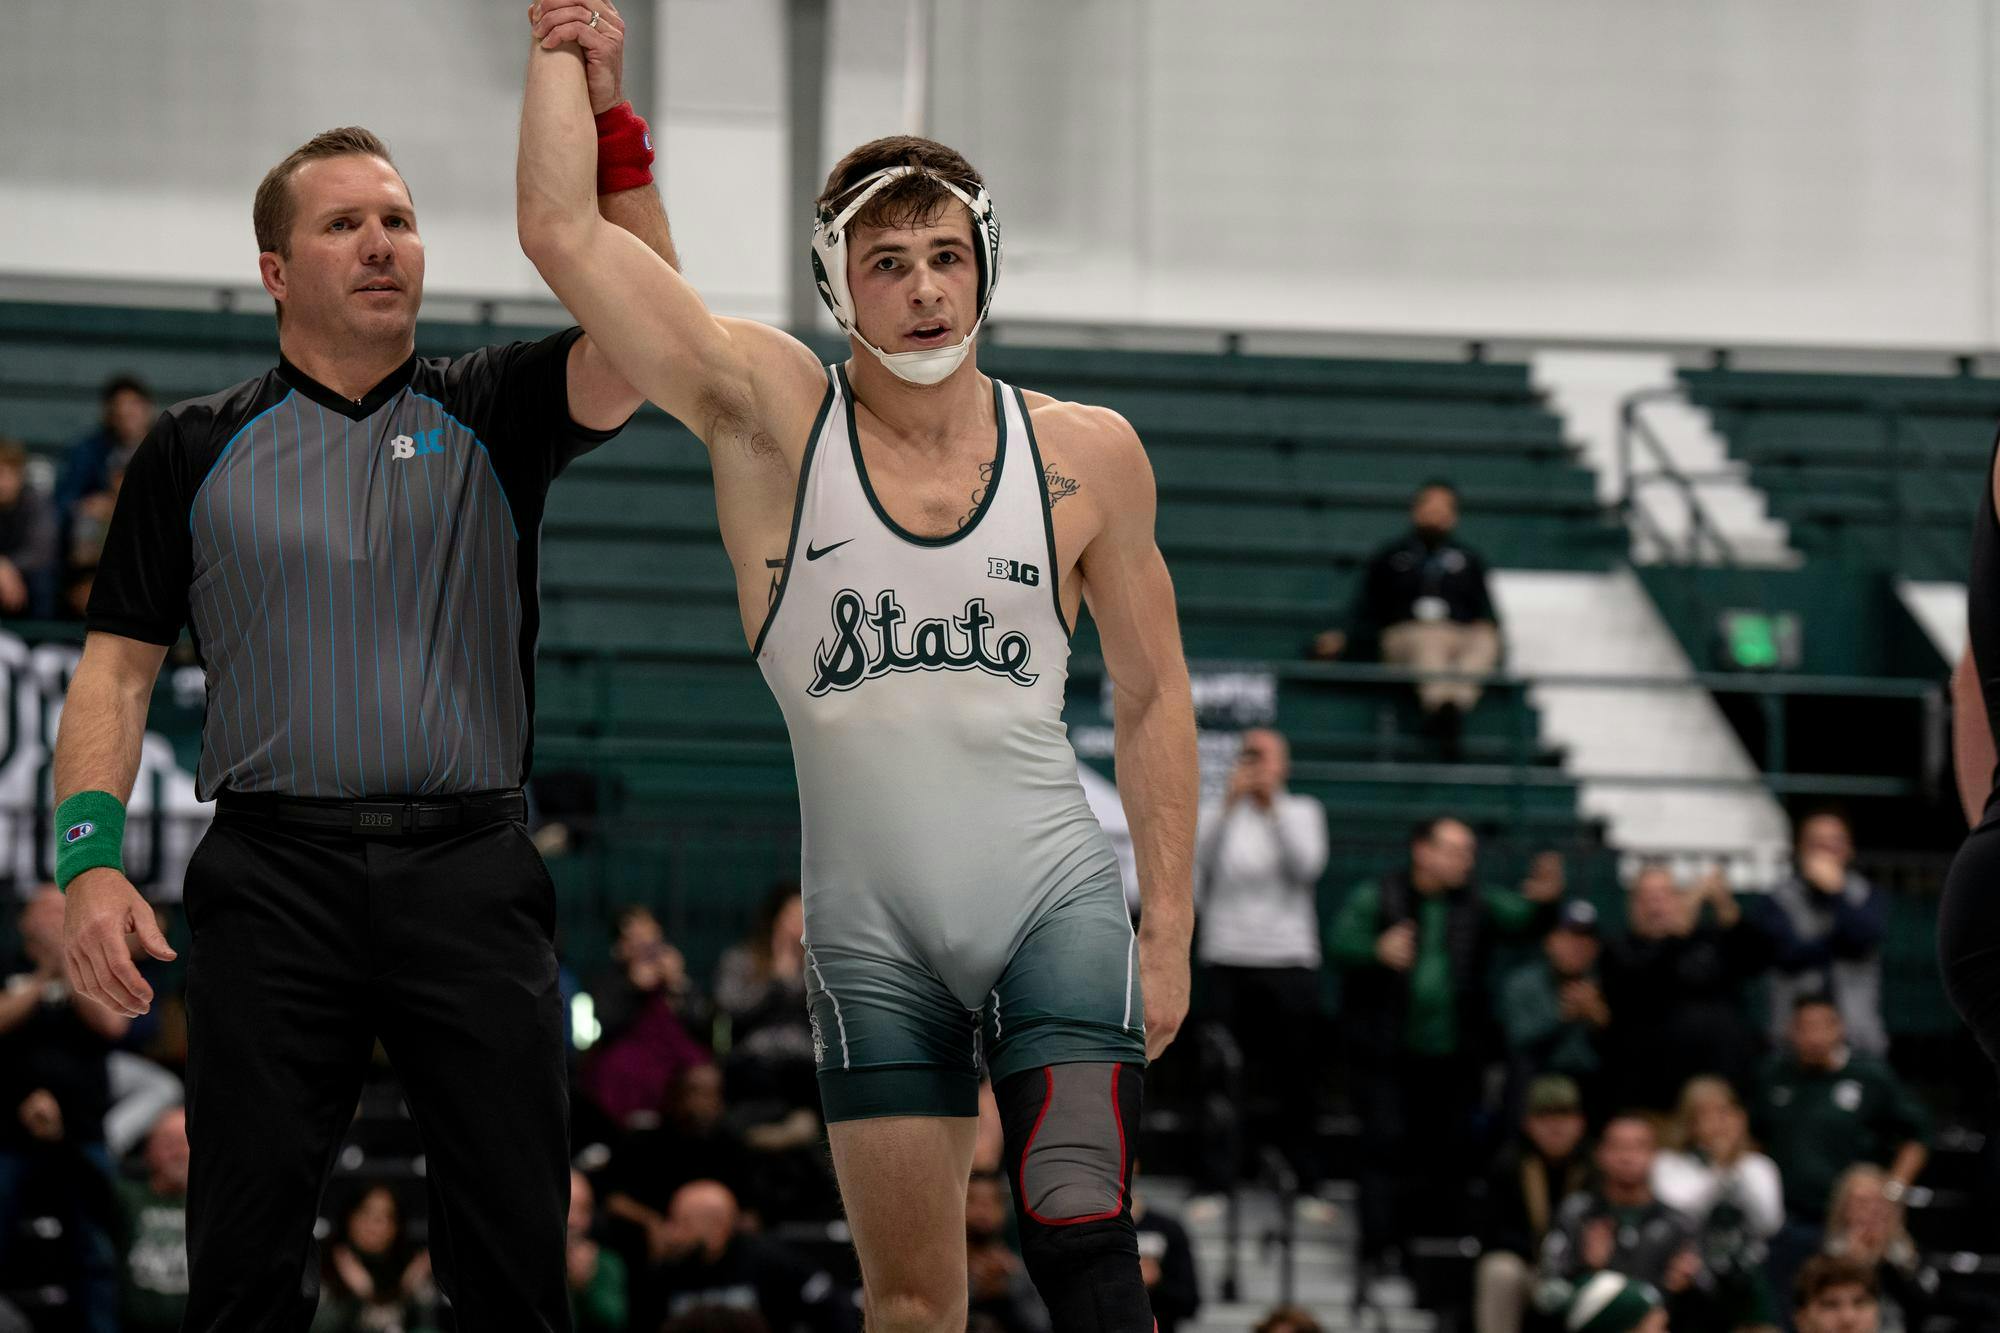 <p>Michigan State No. 19 Layne Malczewski (5-4) celebrates his victory over No. 20 sophomore Brian Soldano (10-4) of Rutgers. Michigan State fell to No. 12 Rutgers 22-13, falling to 0-2 in conference play.</p>